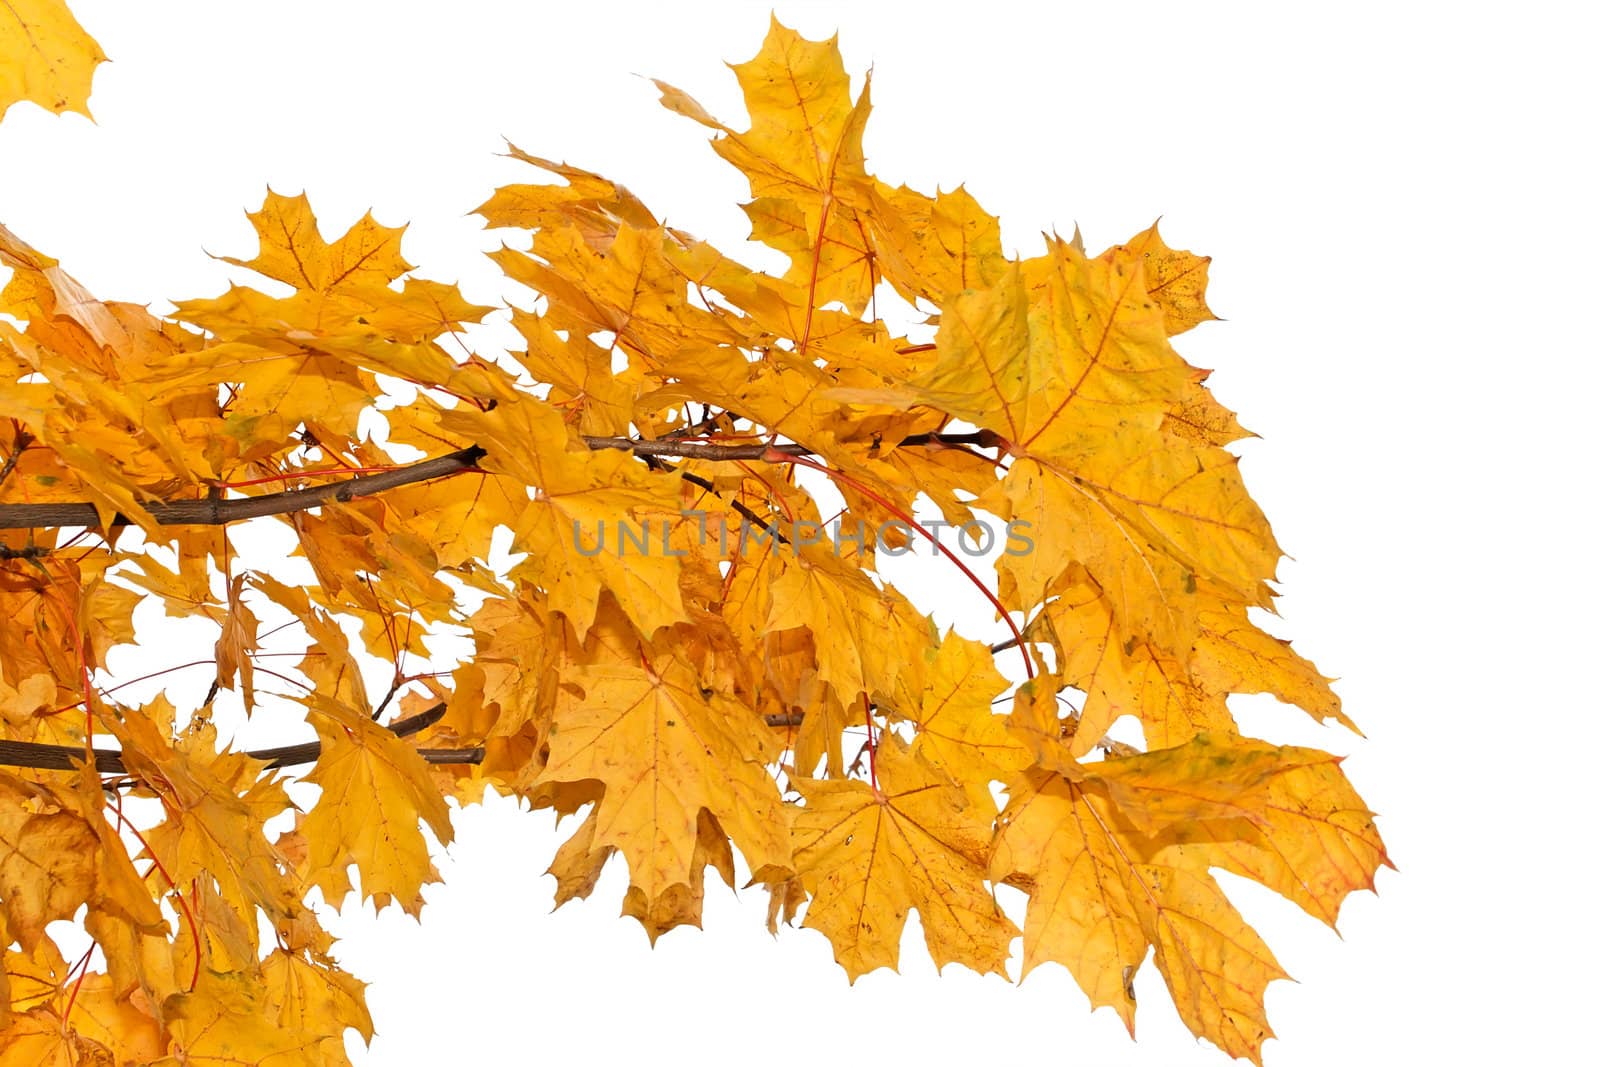 Maple branch with bright yellow leaves in autumn season. Isolated on a white background